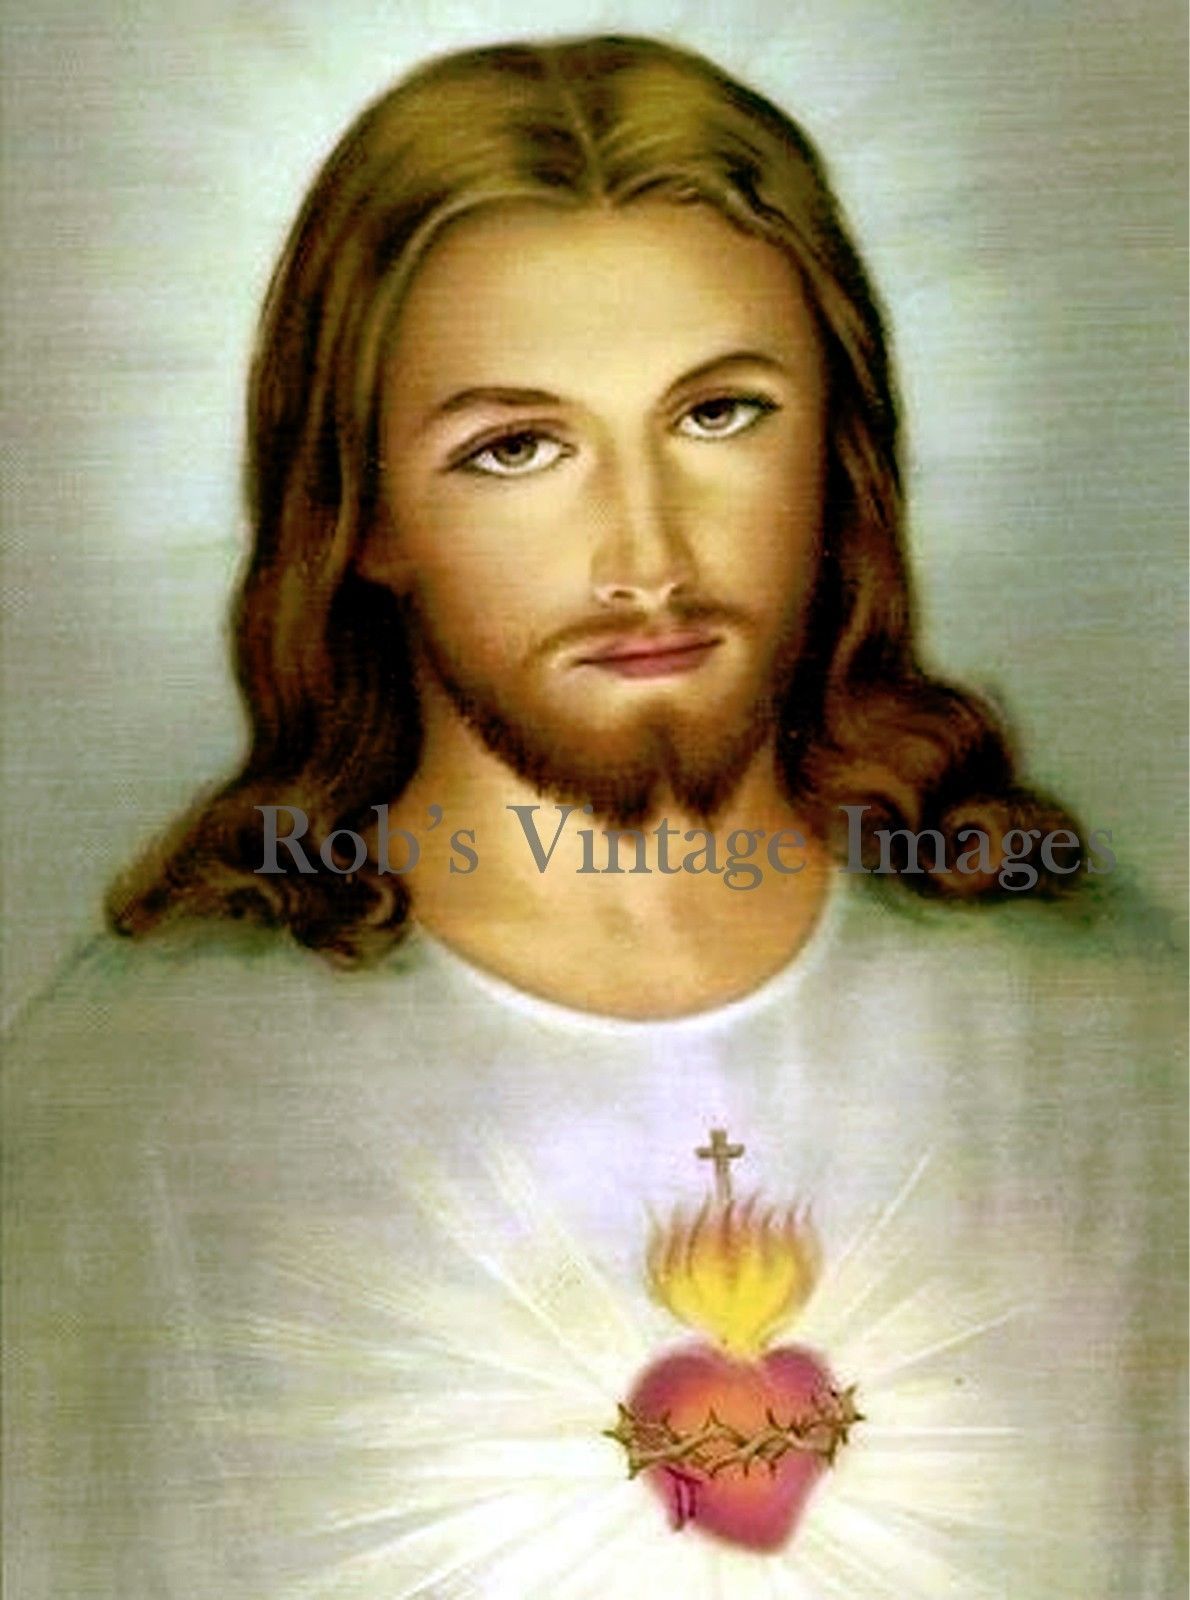 Jesus Painting Images at PaintingValley.com | Explore collection of ...